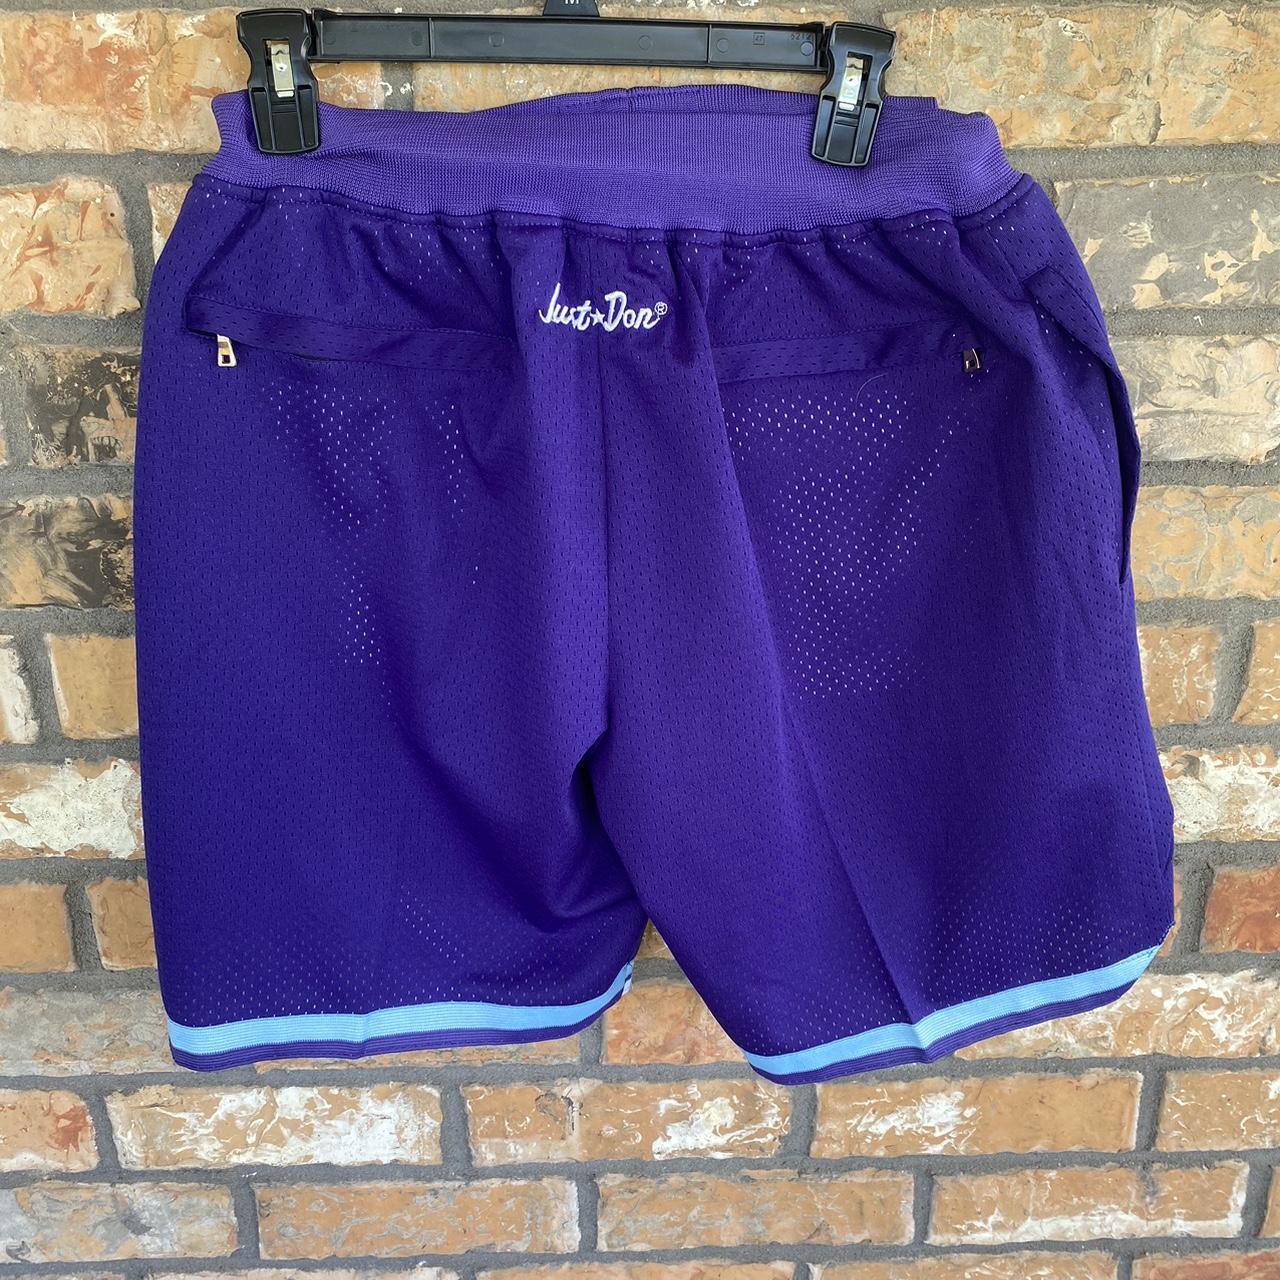 CHARLOTTE HORNETS JUST DON NBA BASKETBALL SHORTS BRAND NEW WITH TAGS SIZES  SMALL, MEDIUM AND LARGE AVAILABLE for Sale in Charlotte, NC - OfferUp